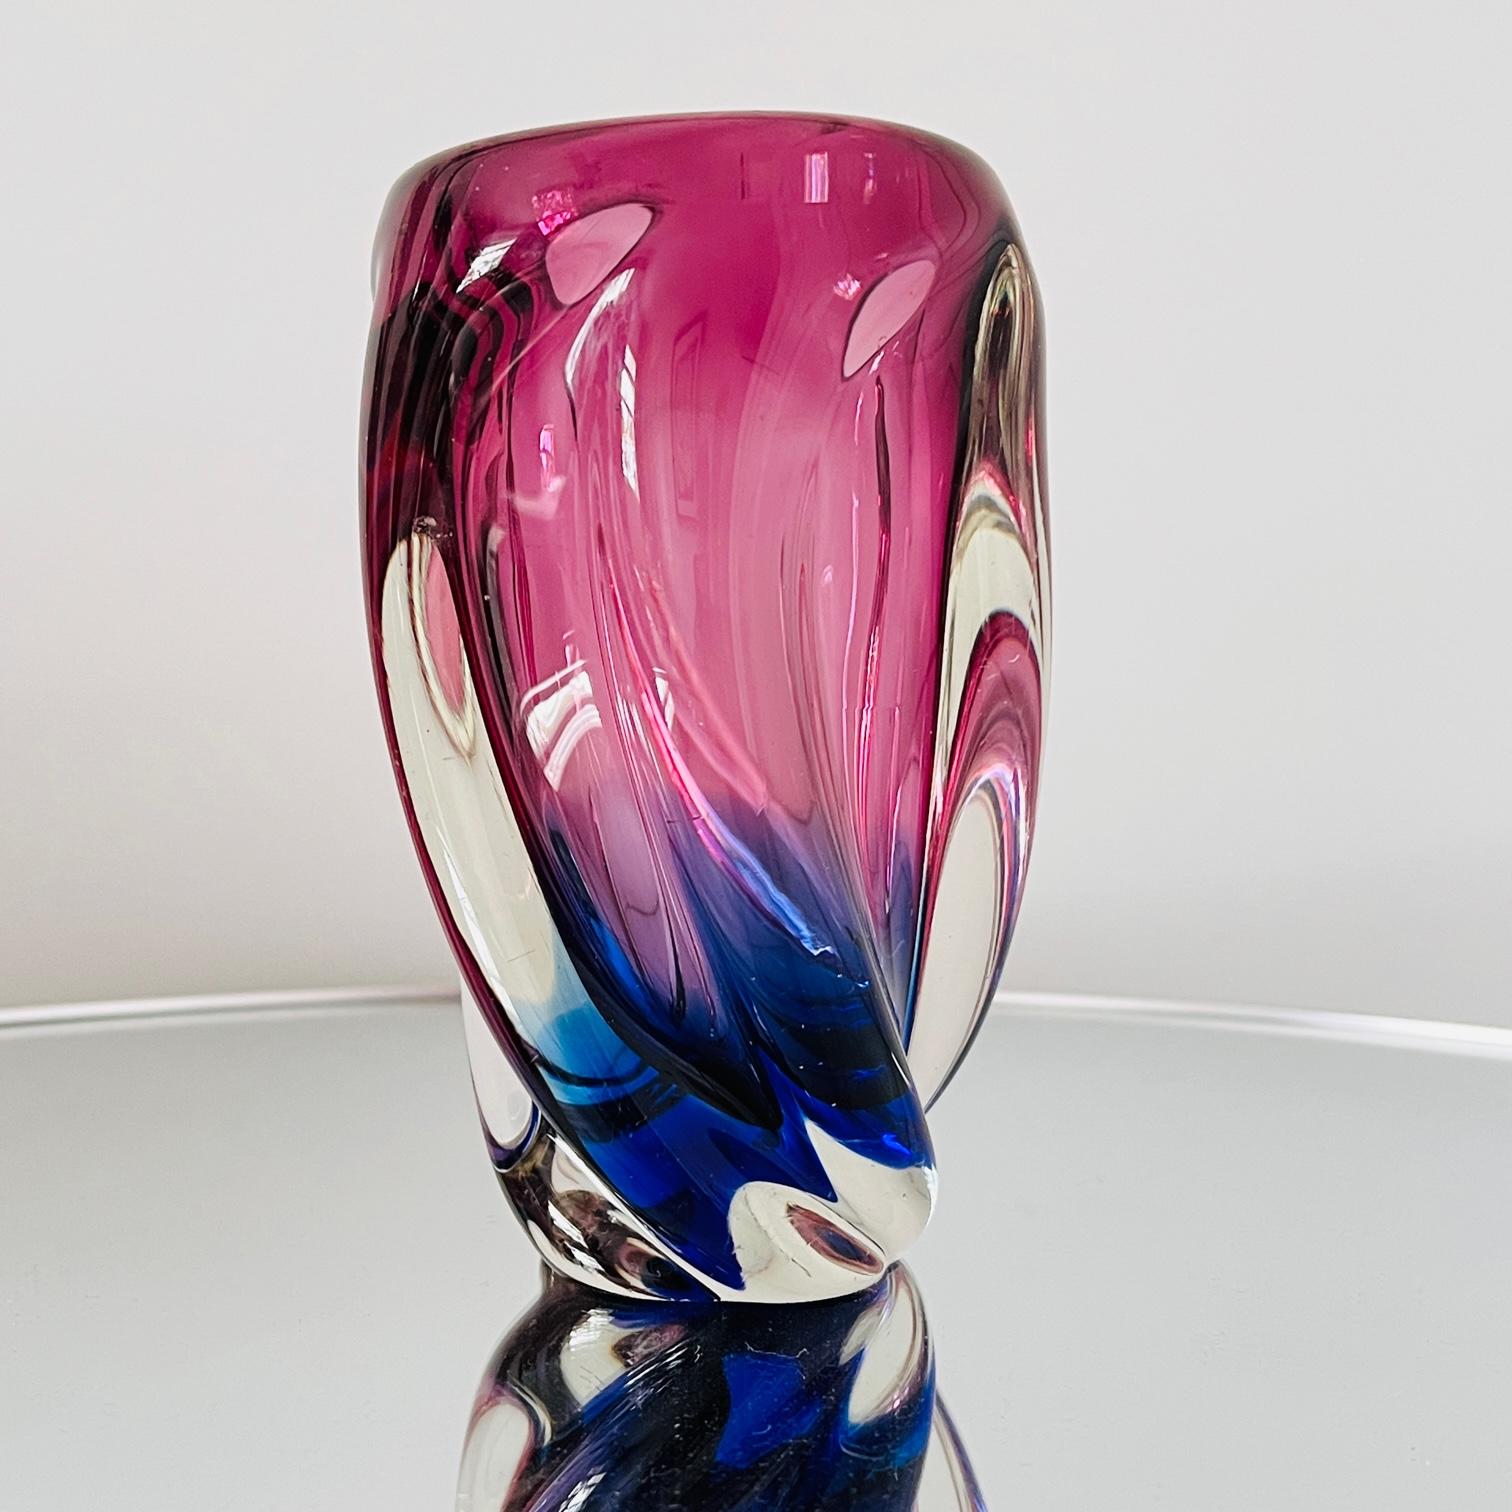 1960's Italian vase comprised of handblown Murano Glass in hues of amethyst purple, violet, and cobalt blue. The heavy-set glass features a fluid swirl design using the Sommerso technique whereby the colors are cased within the glass and submerge